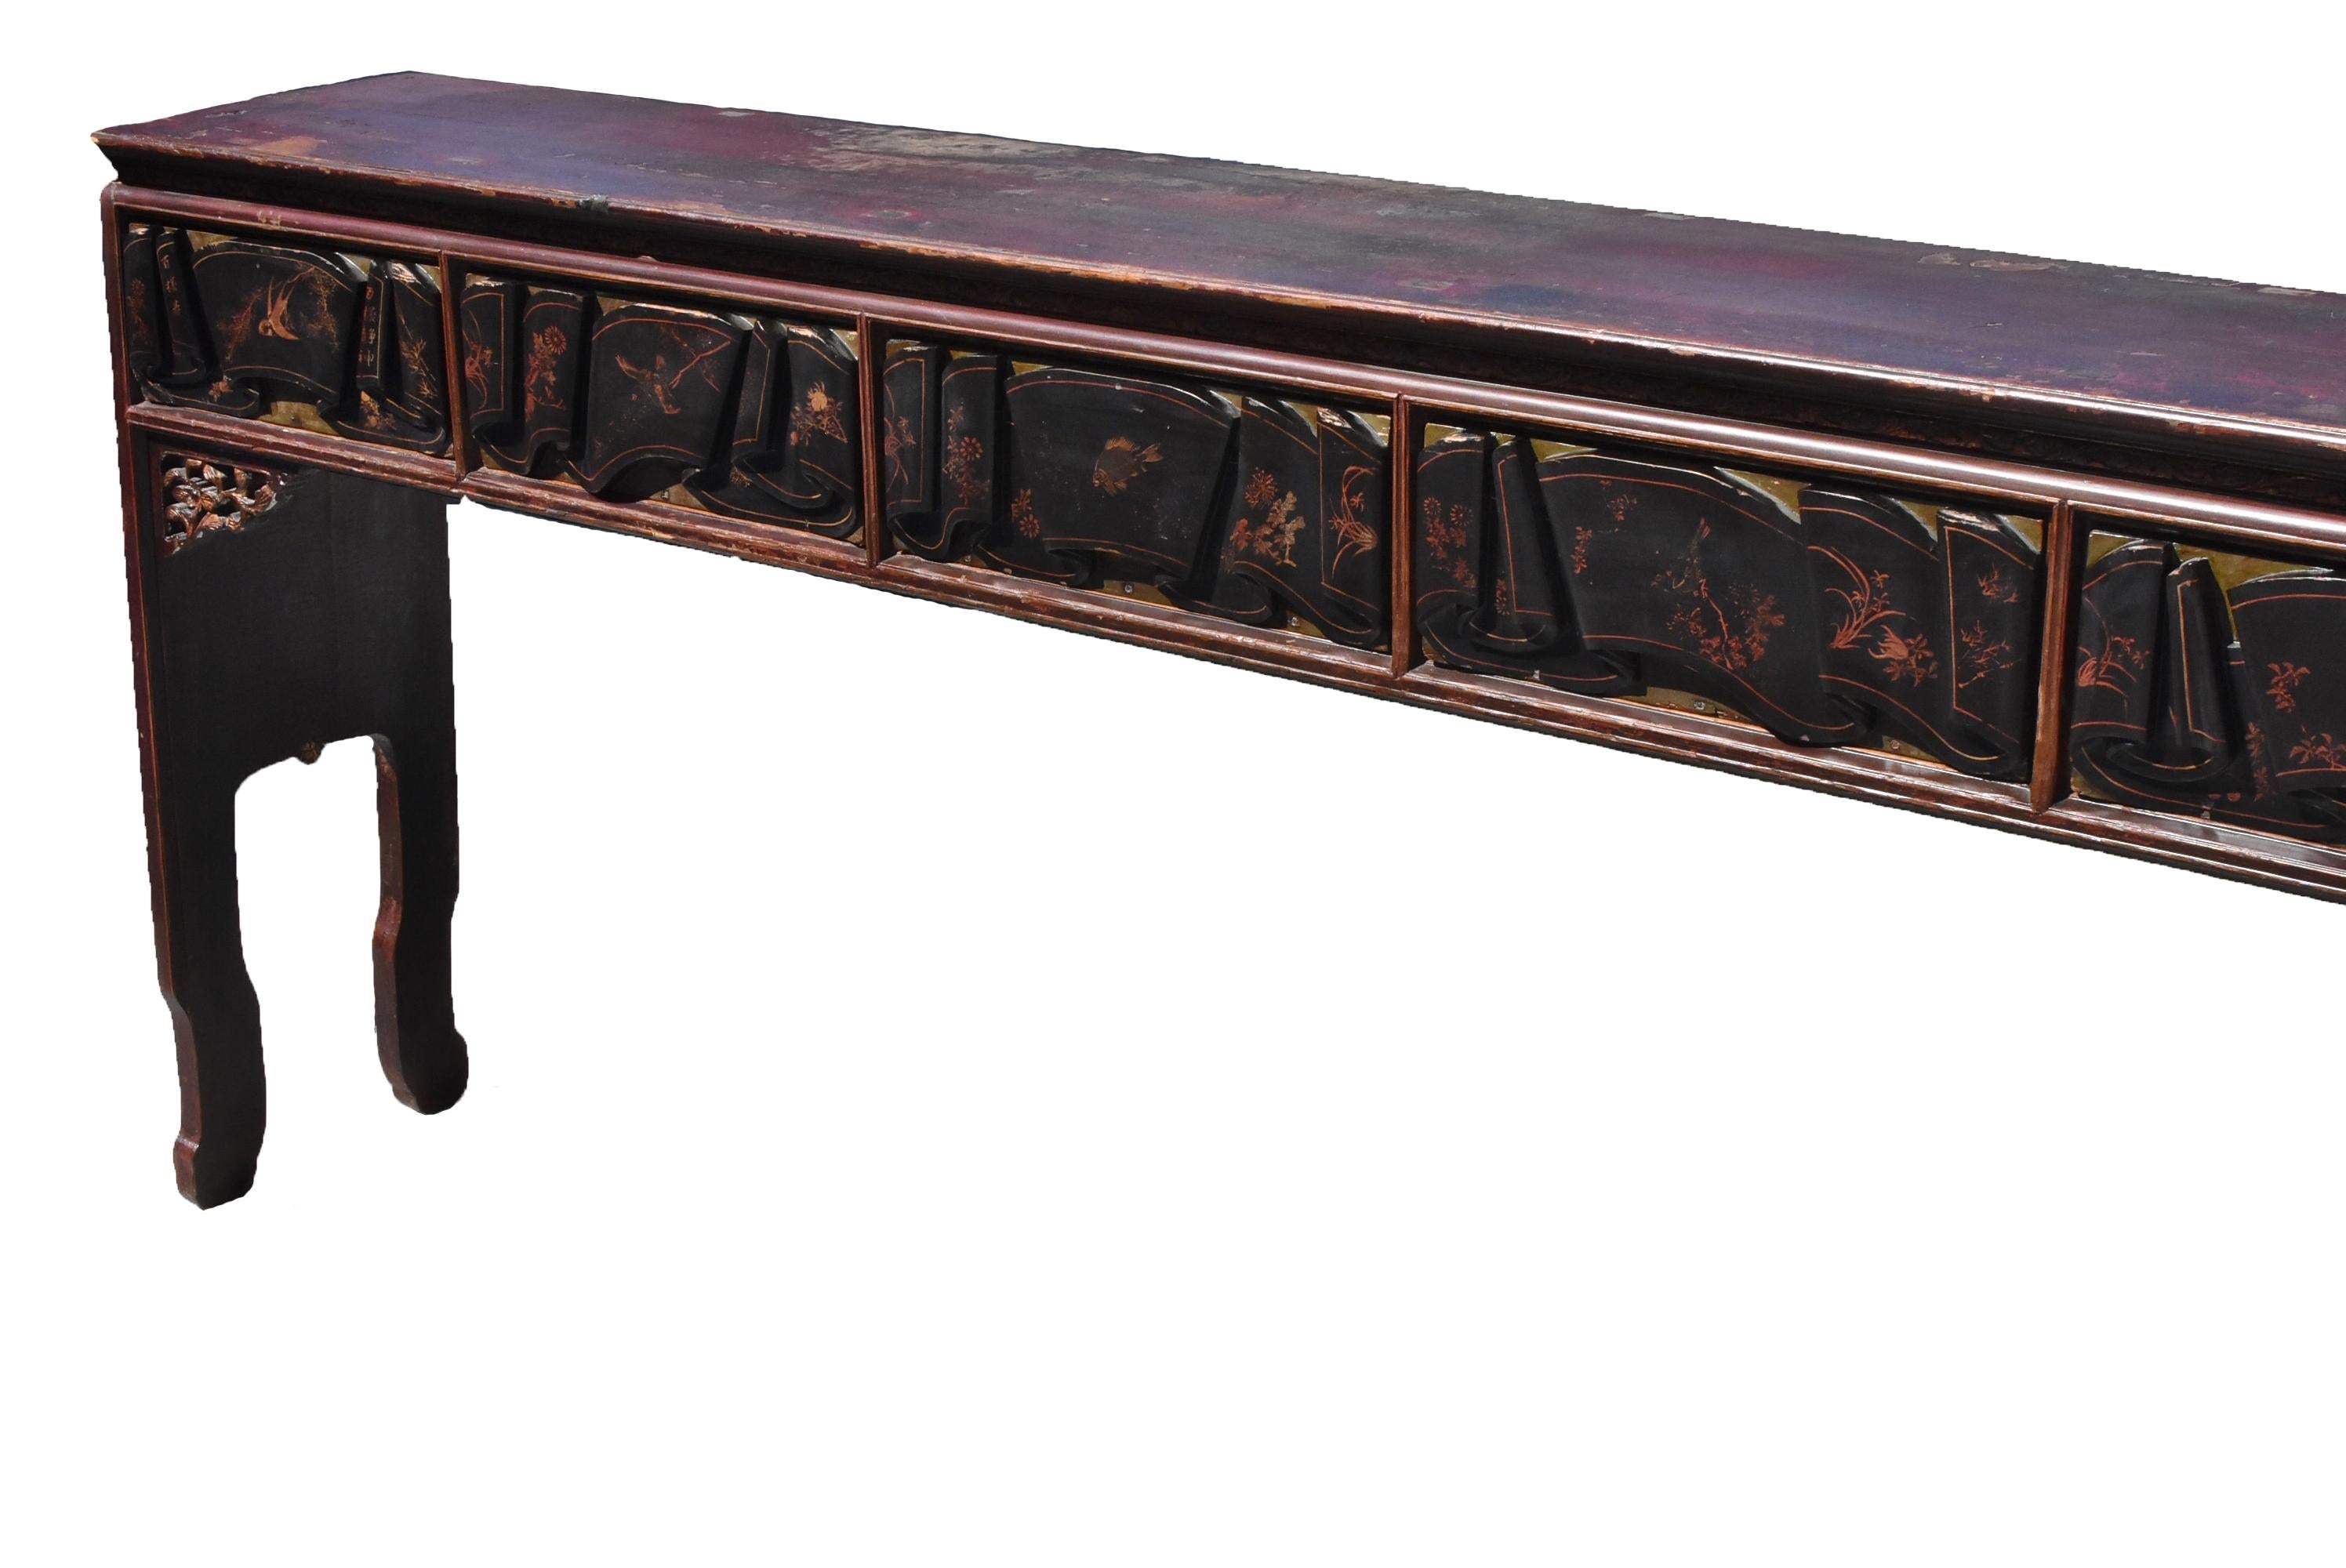 A rare, beautiful table from 19th century, China's southern Fu Jian Province. A solid single board top, of tenon and mortise construction, extends nearly 7' long, above a cinched waist and carved strip apron displaying an eternal foliage pattern.